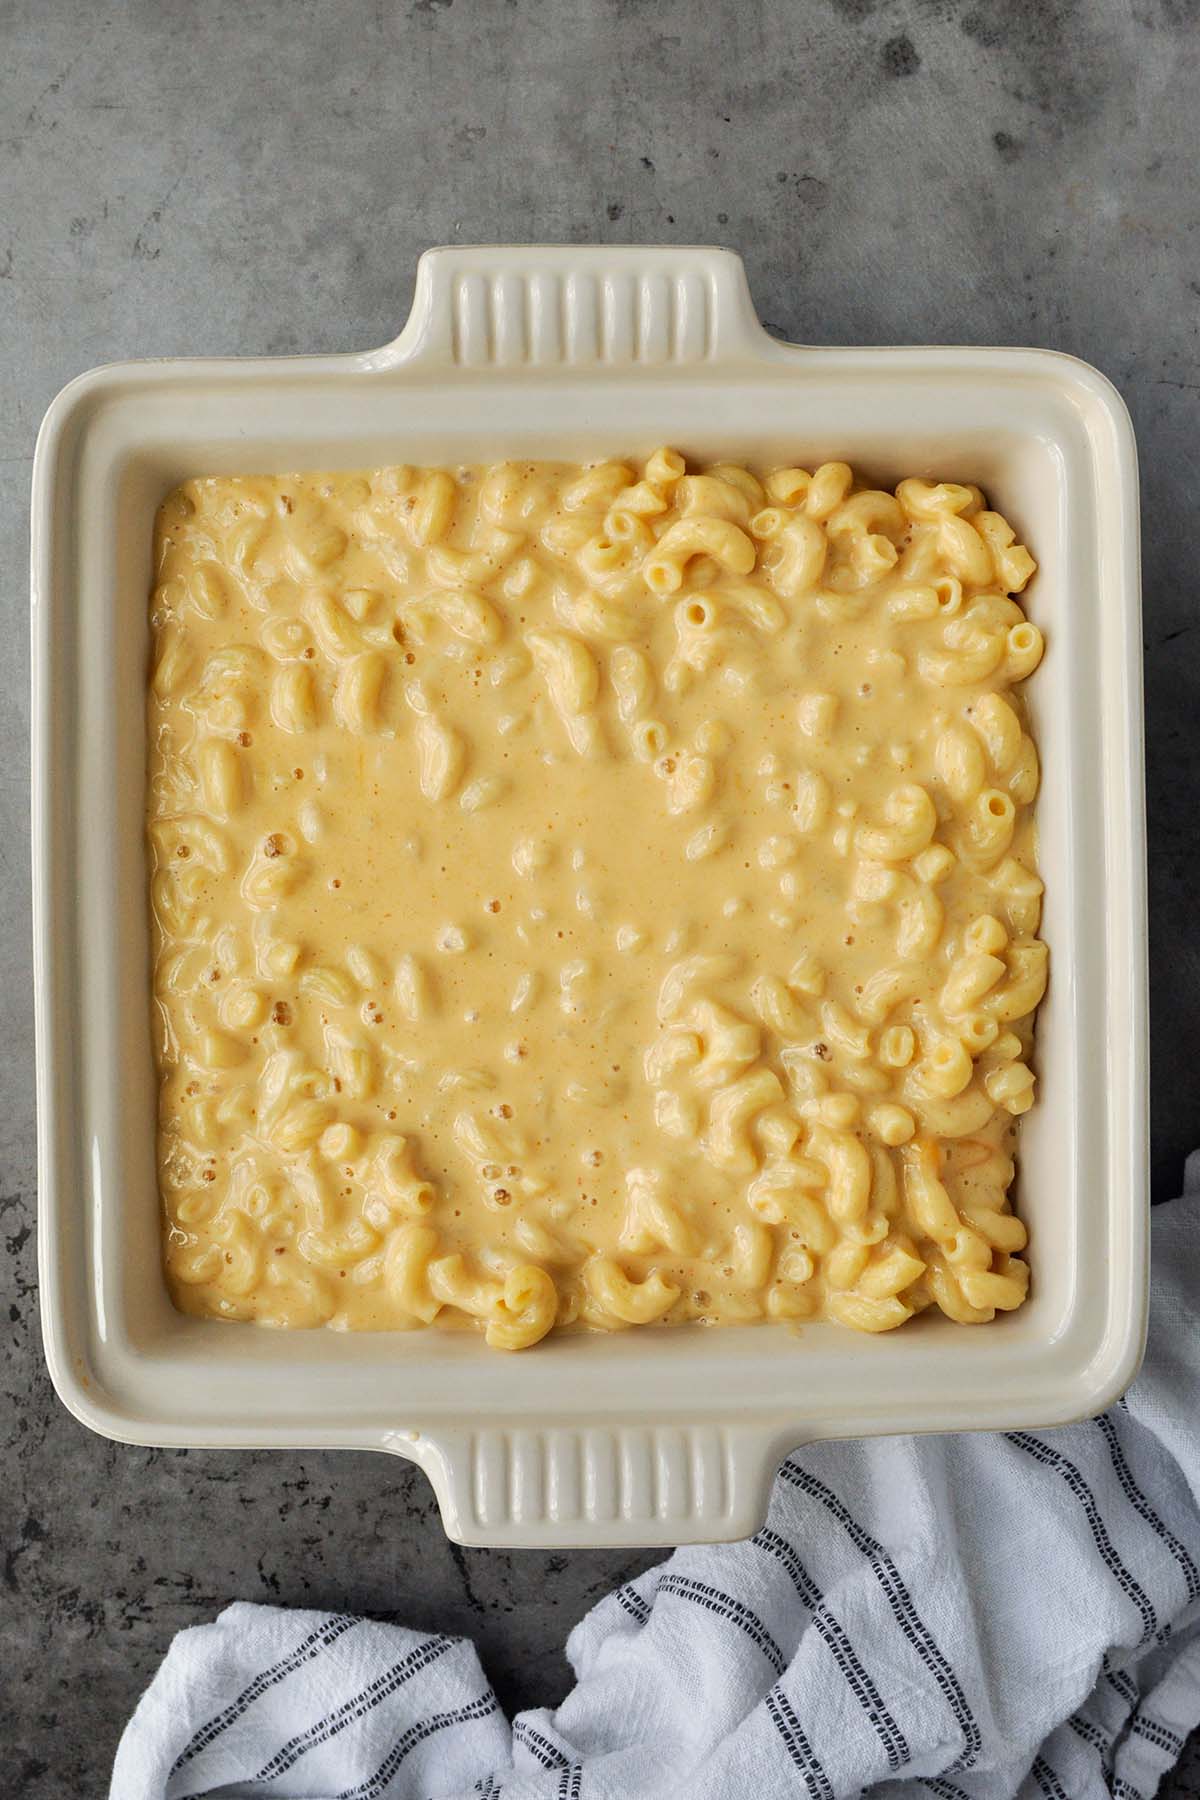 A baking dish of Mac and cheese before adding the Cheetos.